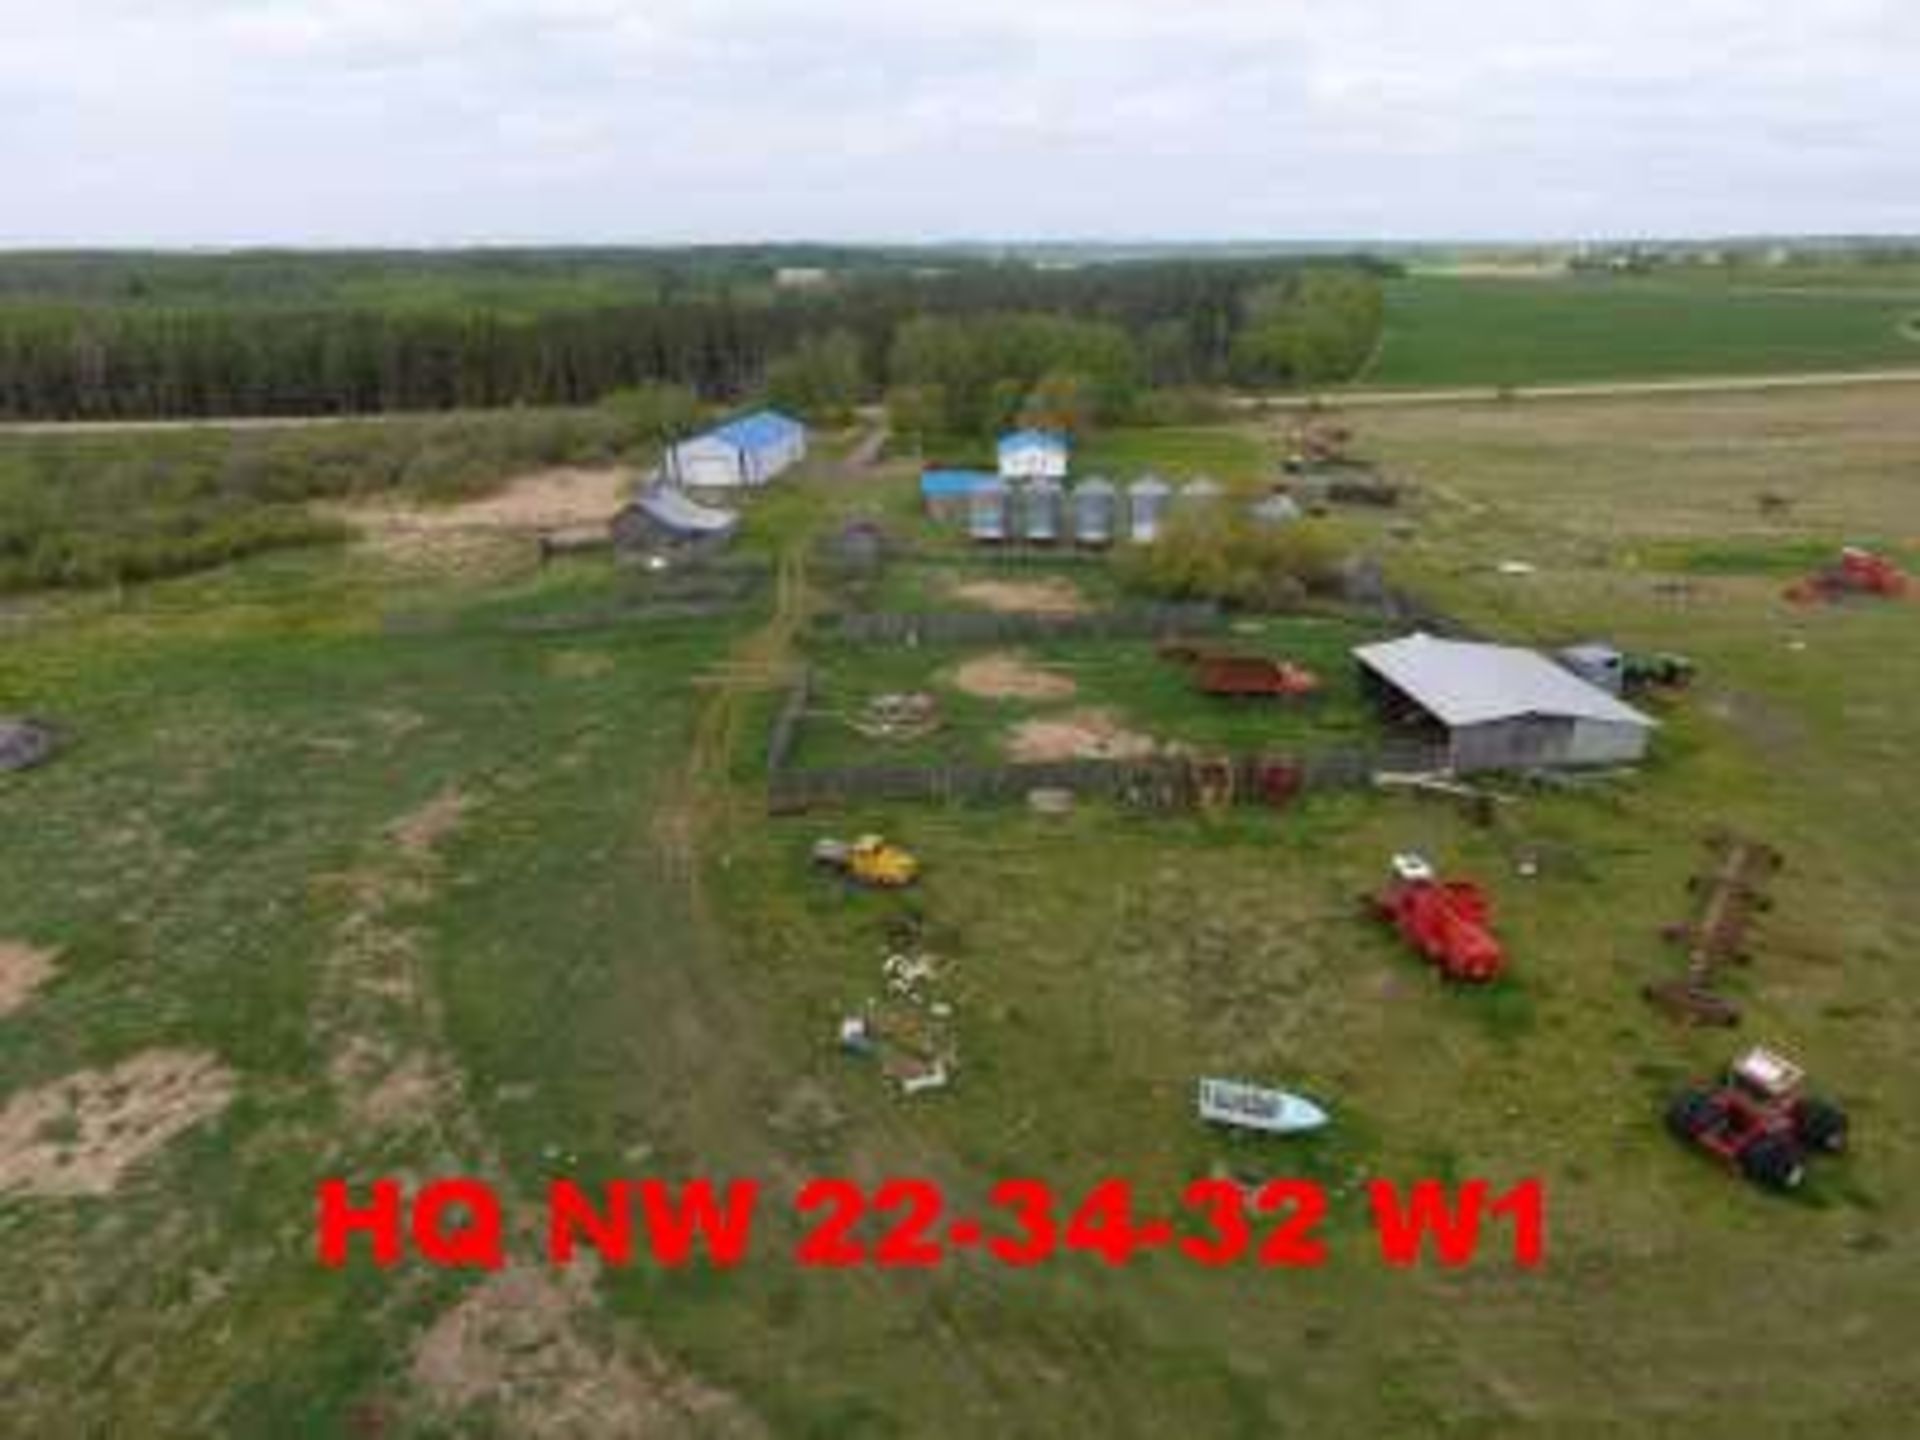 Agriculture and Pasture Land : 1/2 section of land including buildings 3 wired fence as follows: